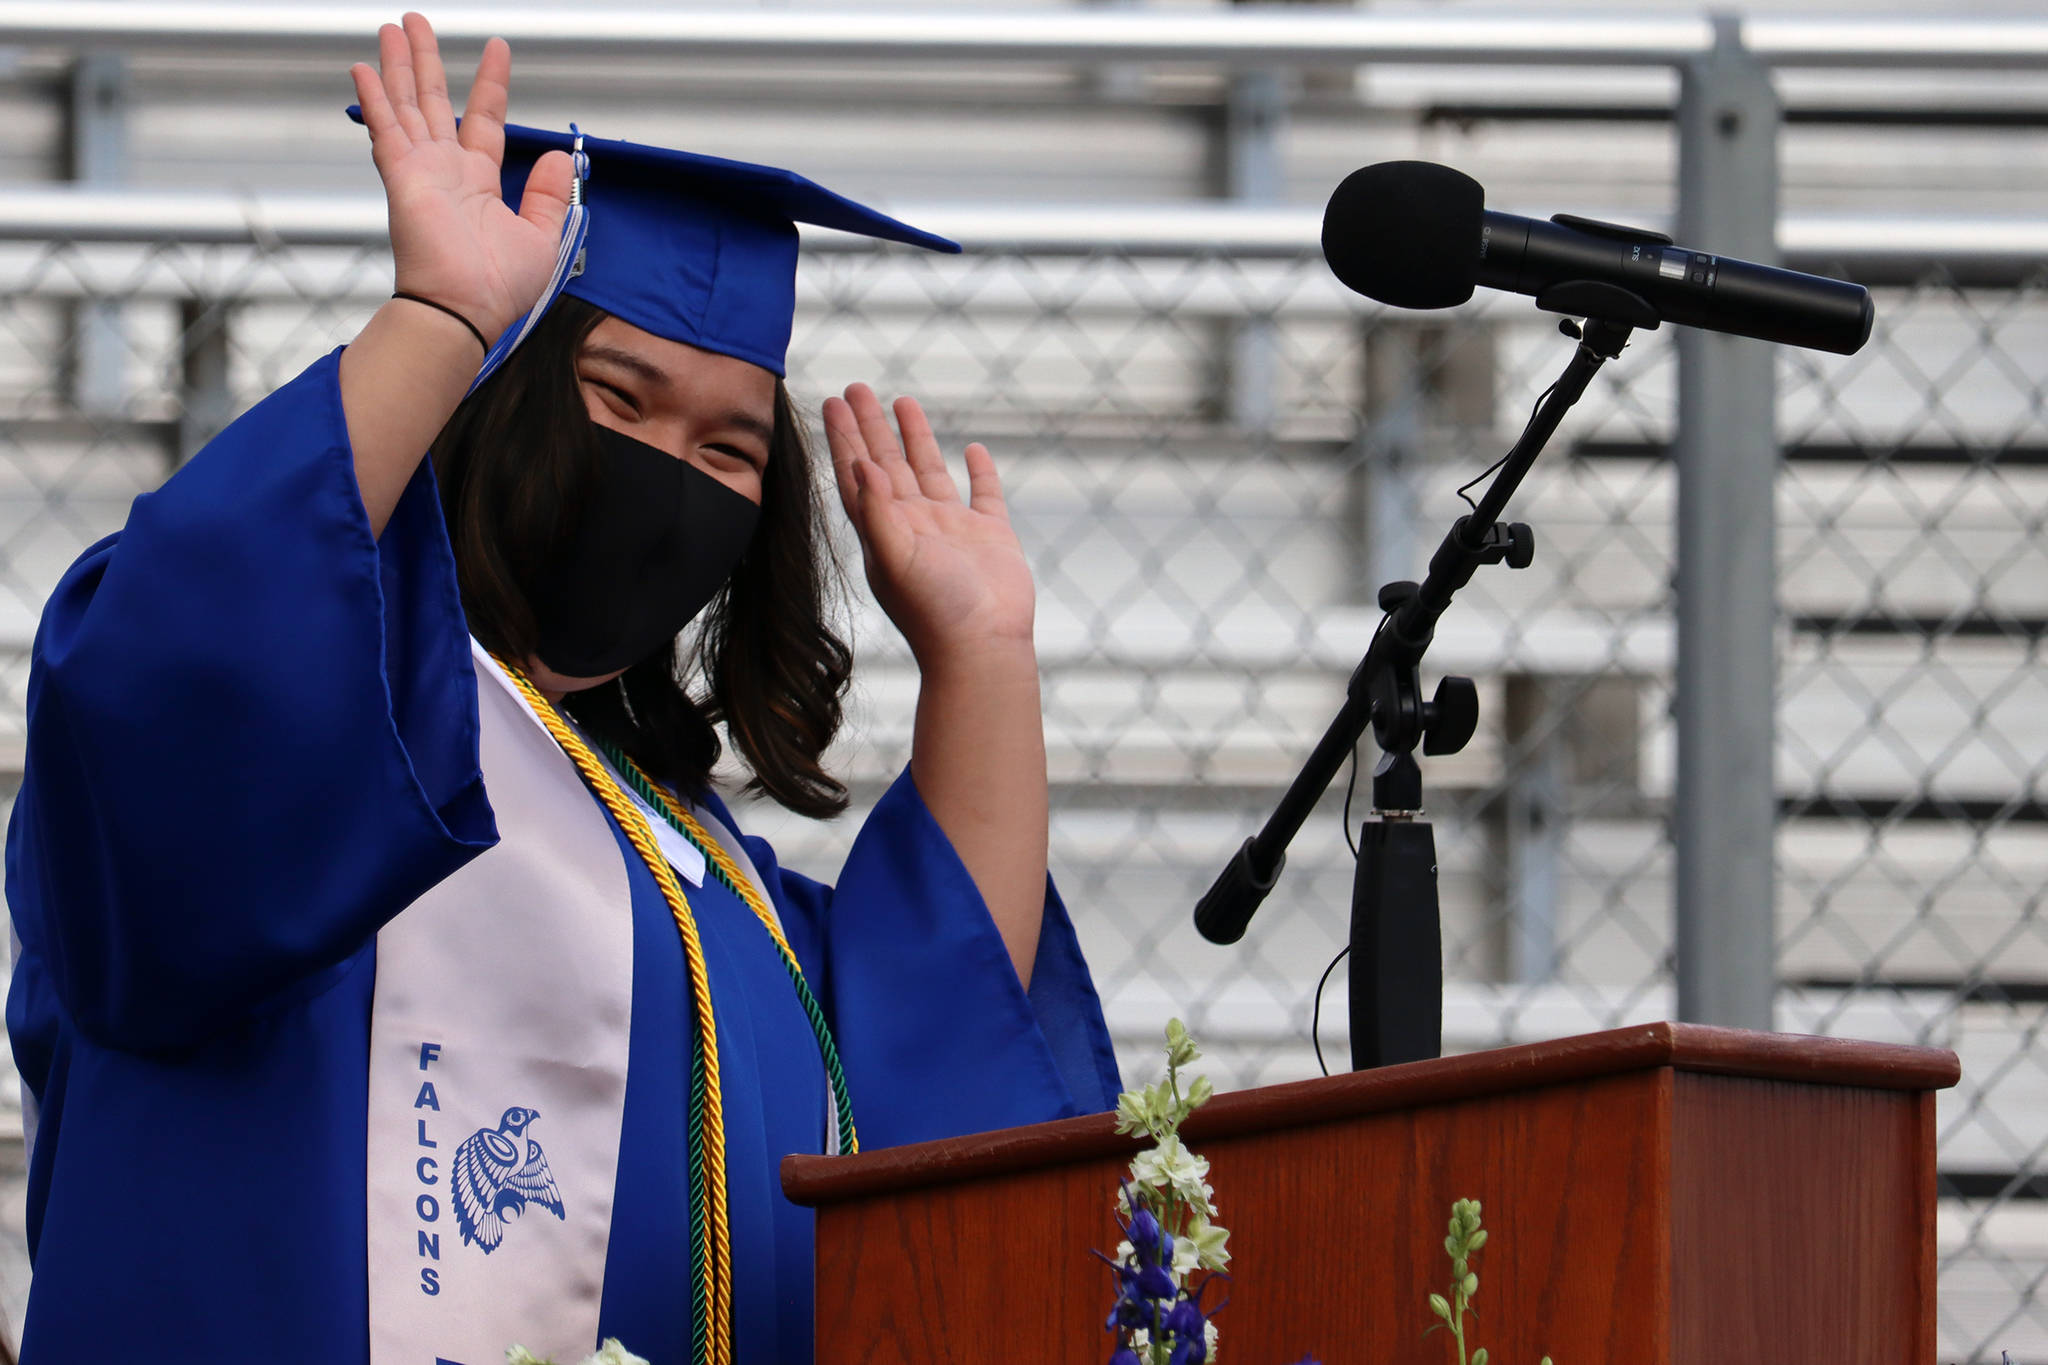 Chemery Marte, Associated Student Body Vice President, makes a celebratory gesture during her student leadership address at Thunder Mountain High School’s graduation ceremony on May 23, 2021. (Ben Hohenstatt / Juneau Empire)